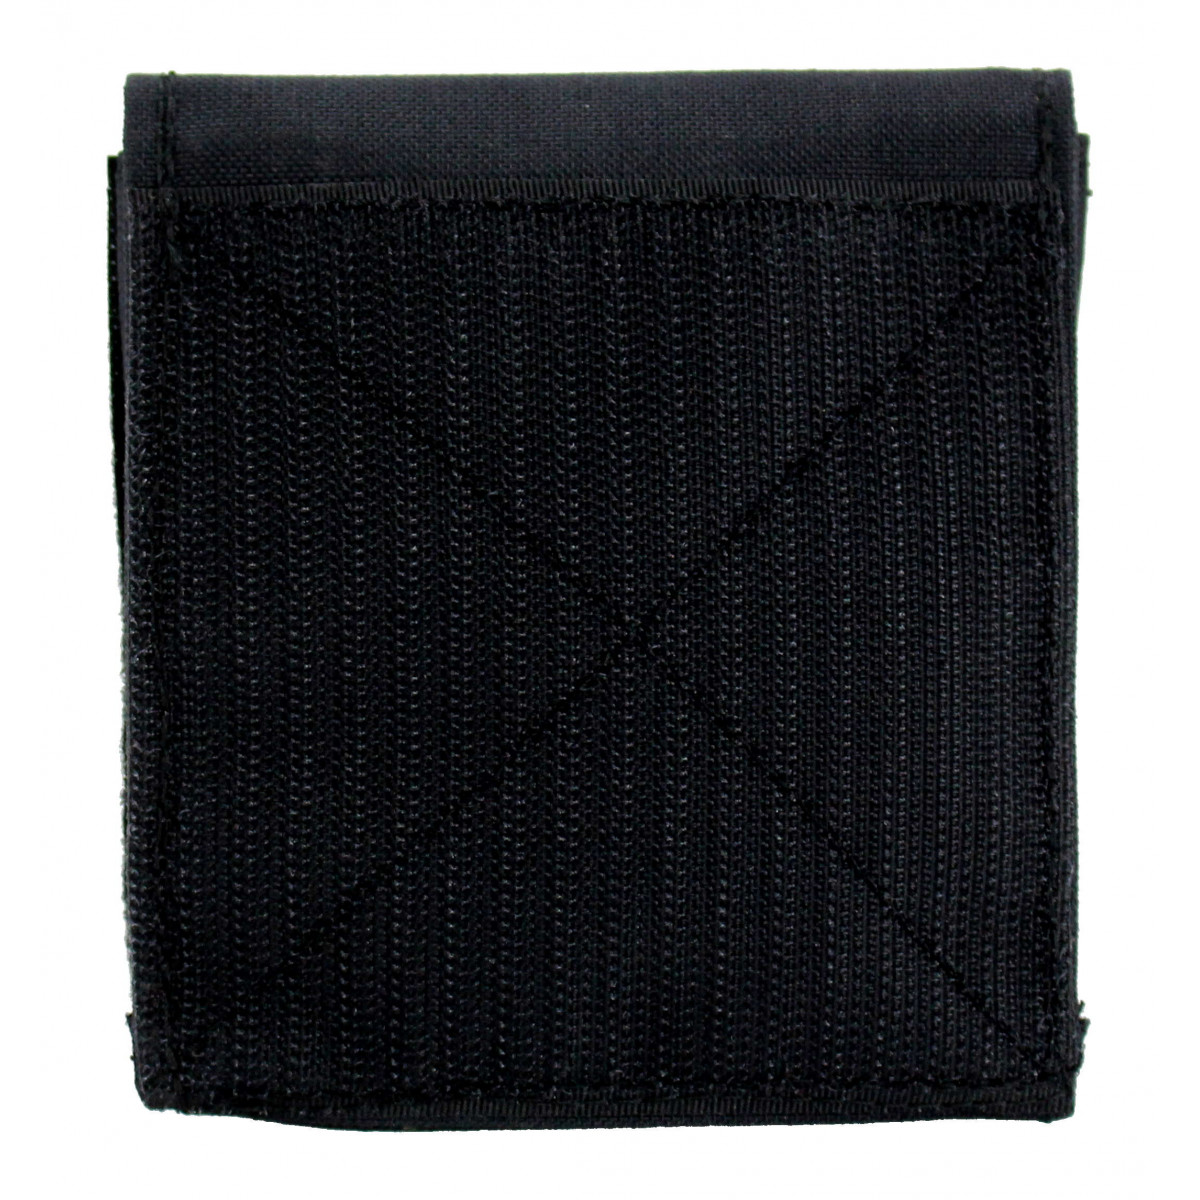 Counterweight Pouch for Helmet Cover